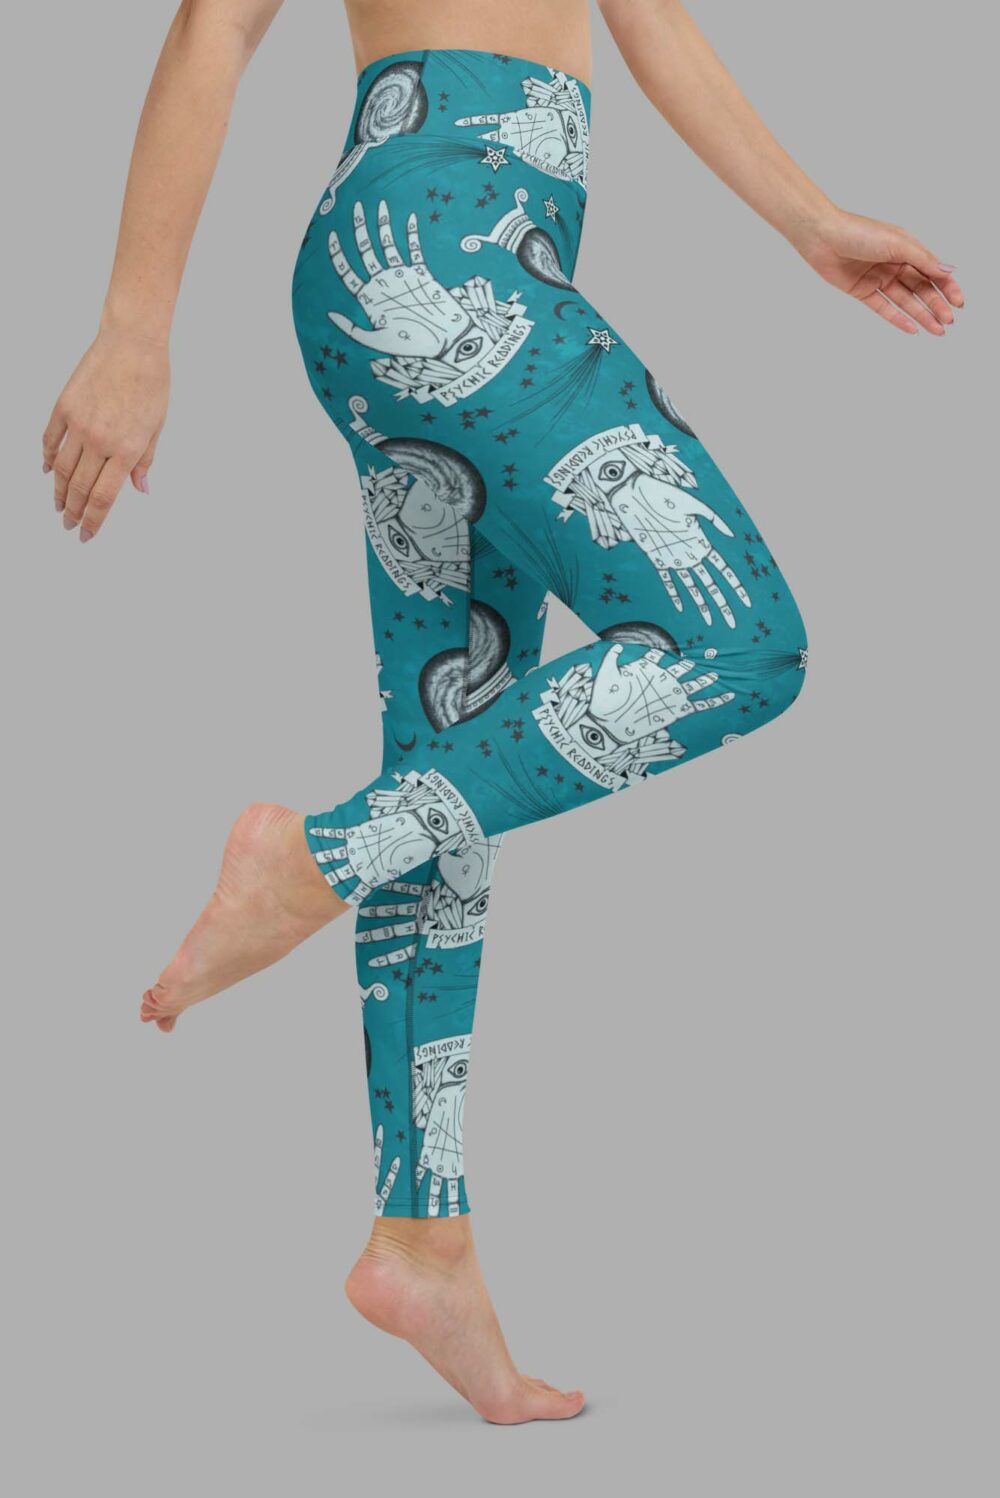 cosmic drifters clairvoyant print one piece yoga leggings side2